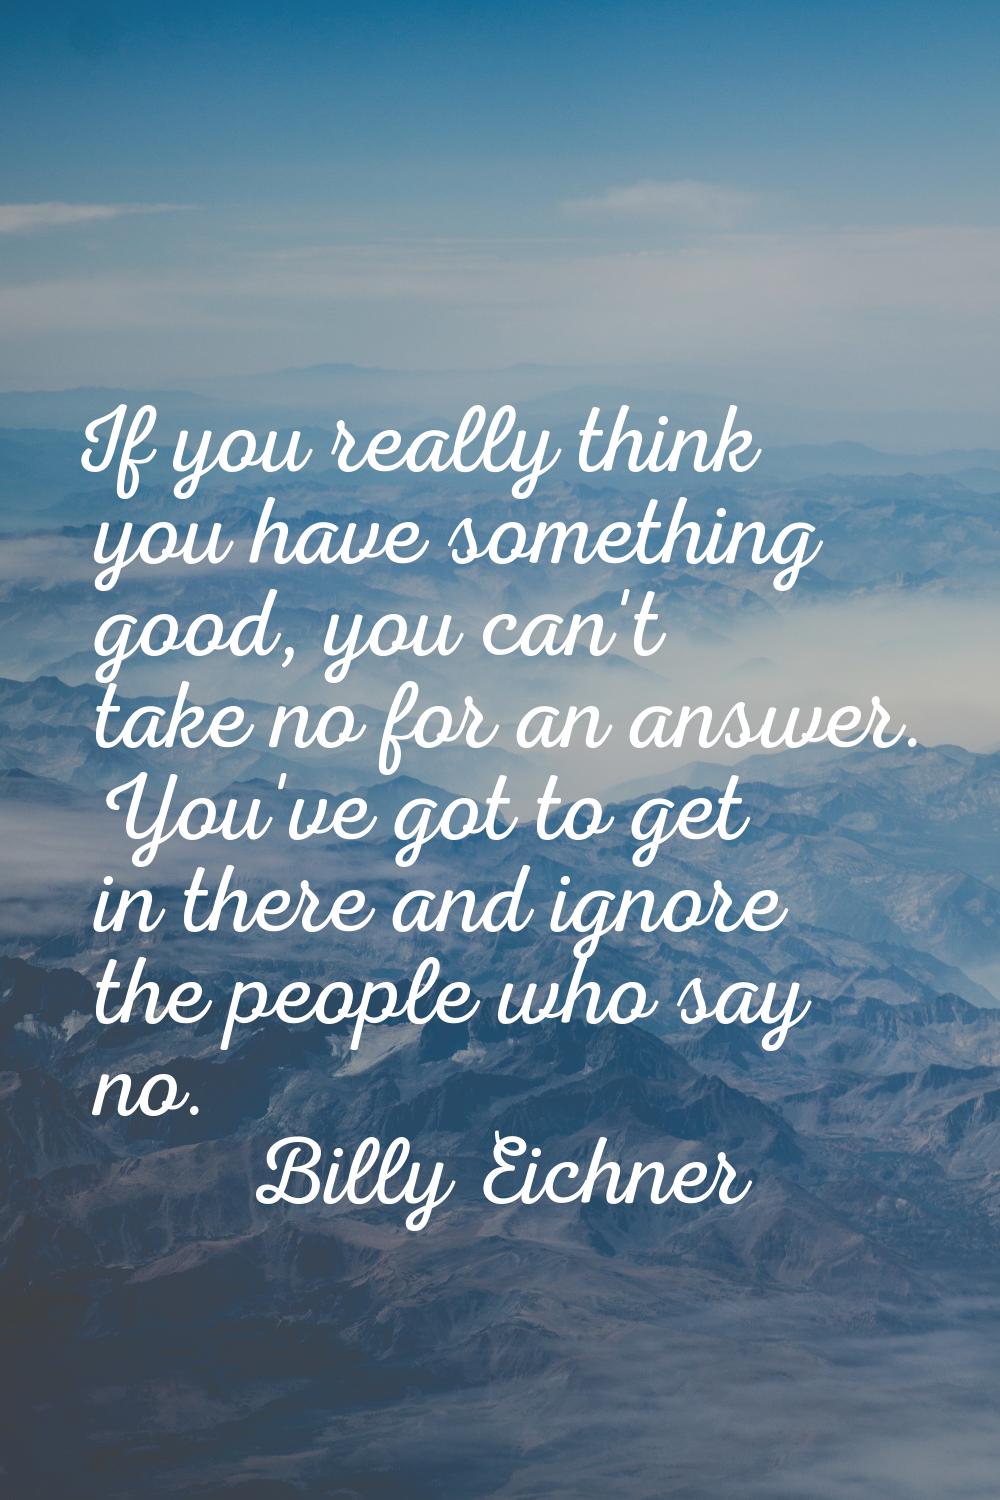 If you really think you have something good, you can't take no for an answer. You've got to get in 